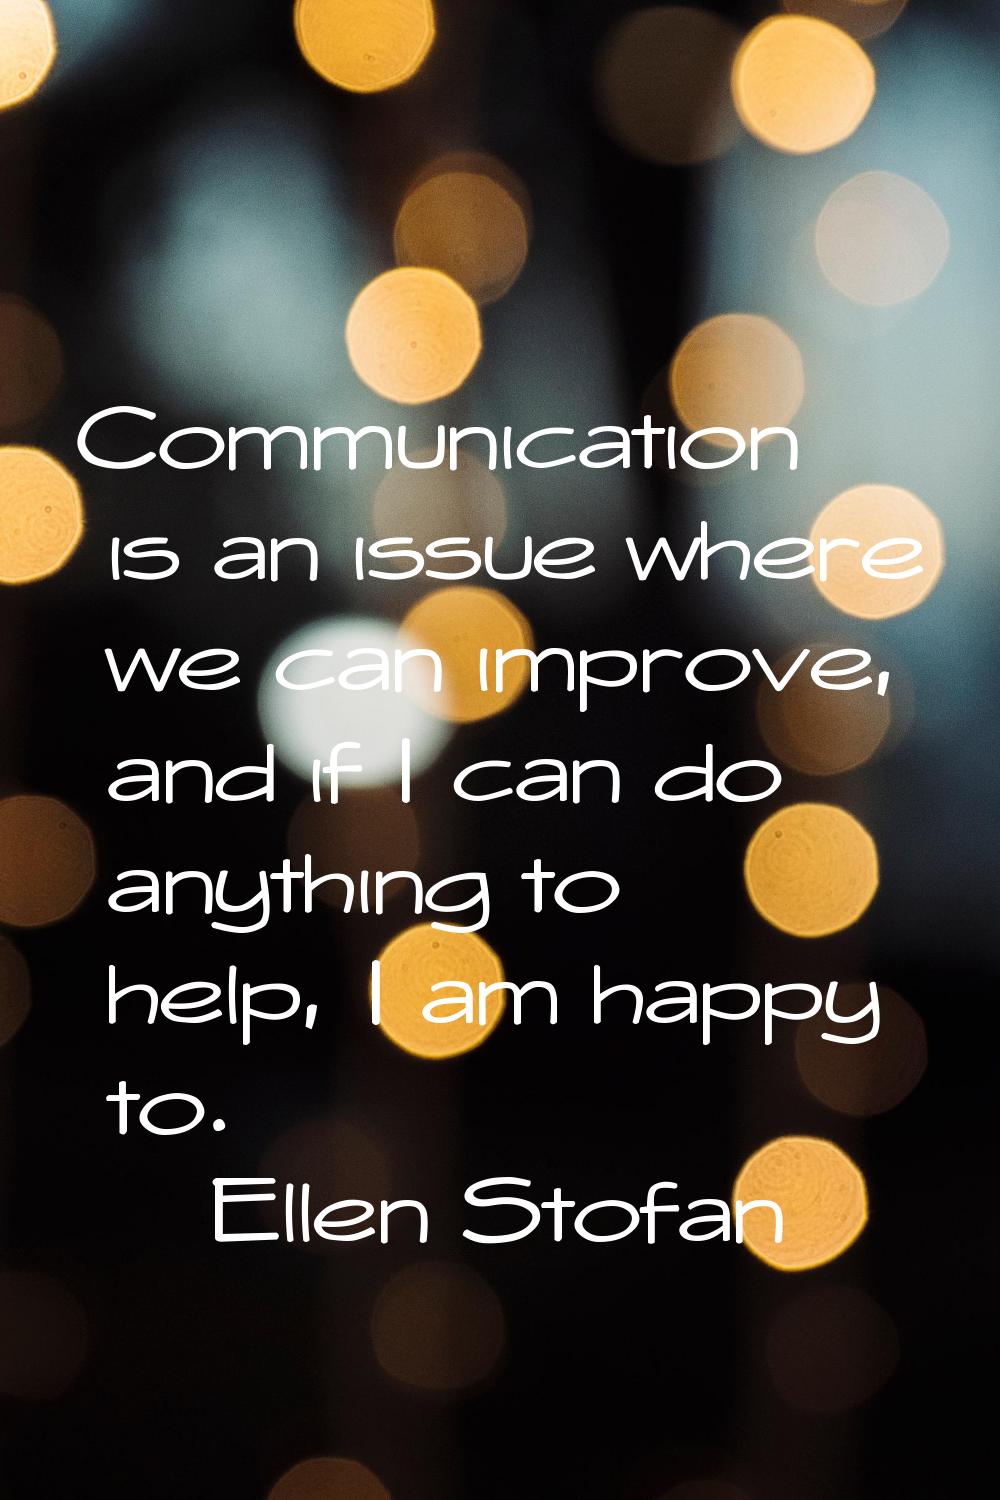 Communication is an issue where we can improve, and if I can do anything to help, I am happy to.